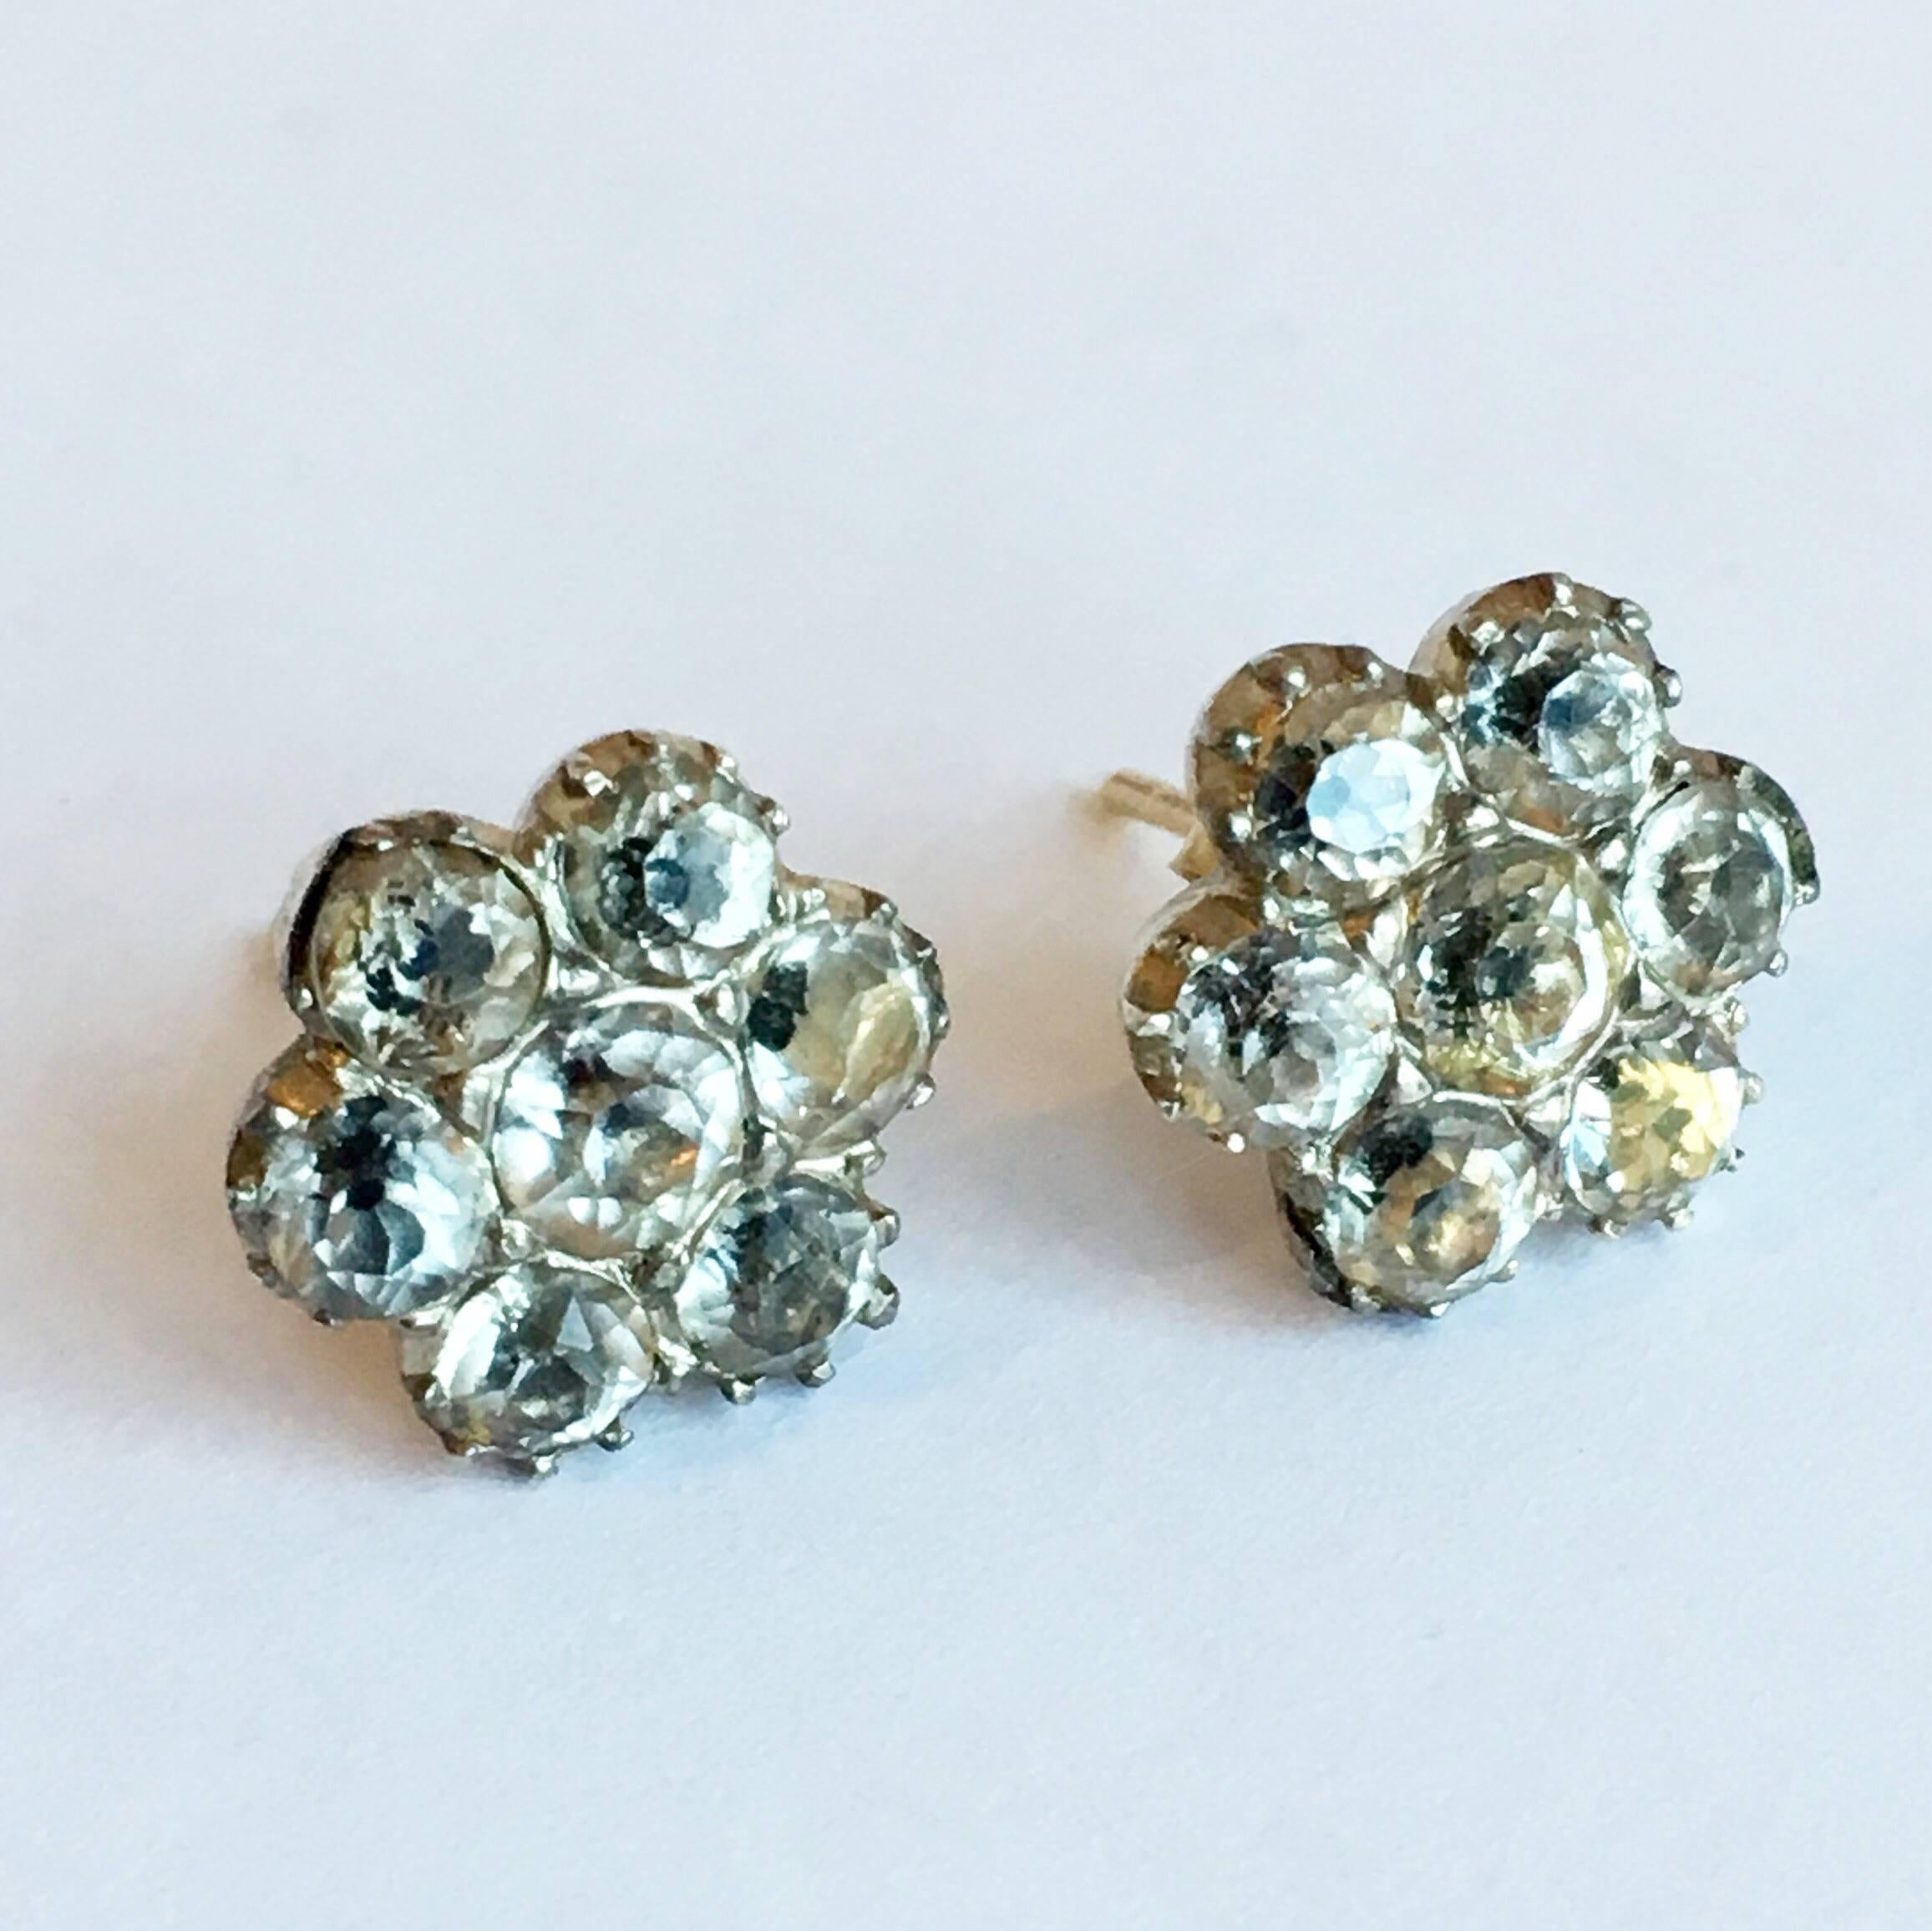 In the Georgian era, paste was virtually interchangeable with diamonds and often set in precious metals such as gold and silver. With their distinctive black dot culets, these dainty flowers are a lovely example. Pinched collet silver settings